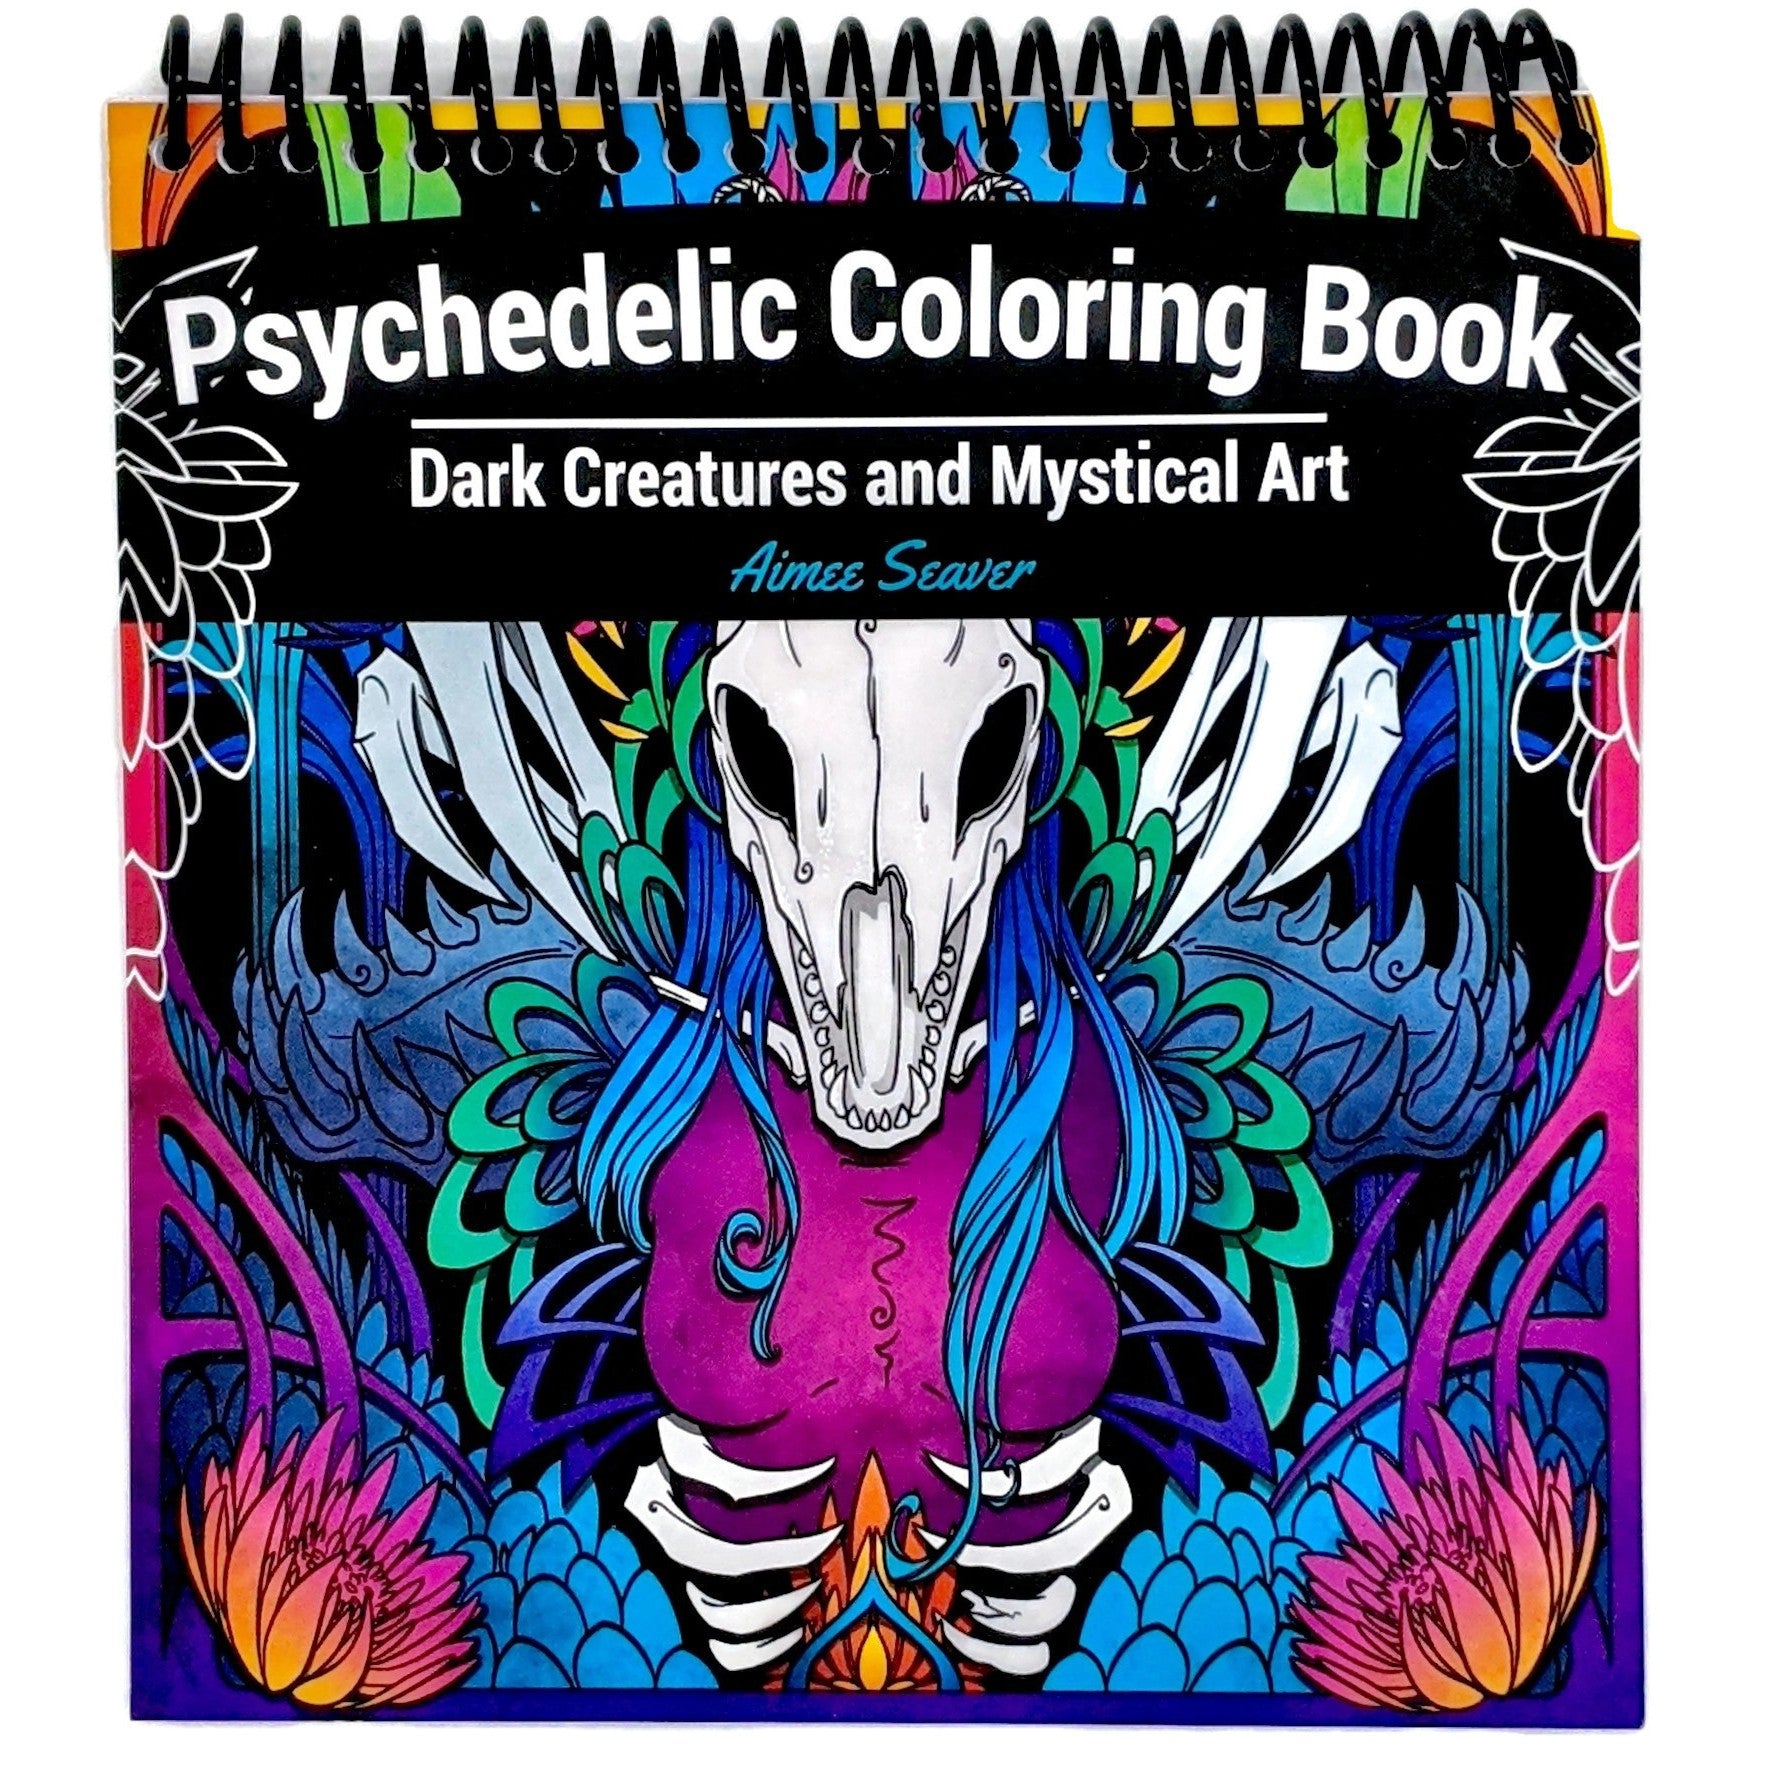 Psychedelic Coloring Book: Dark Creatures and Mystical Art